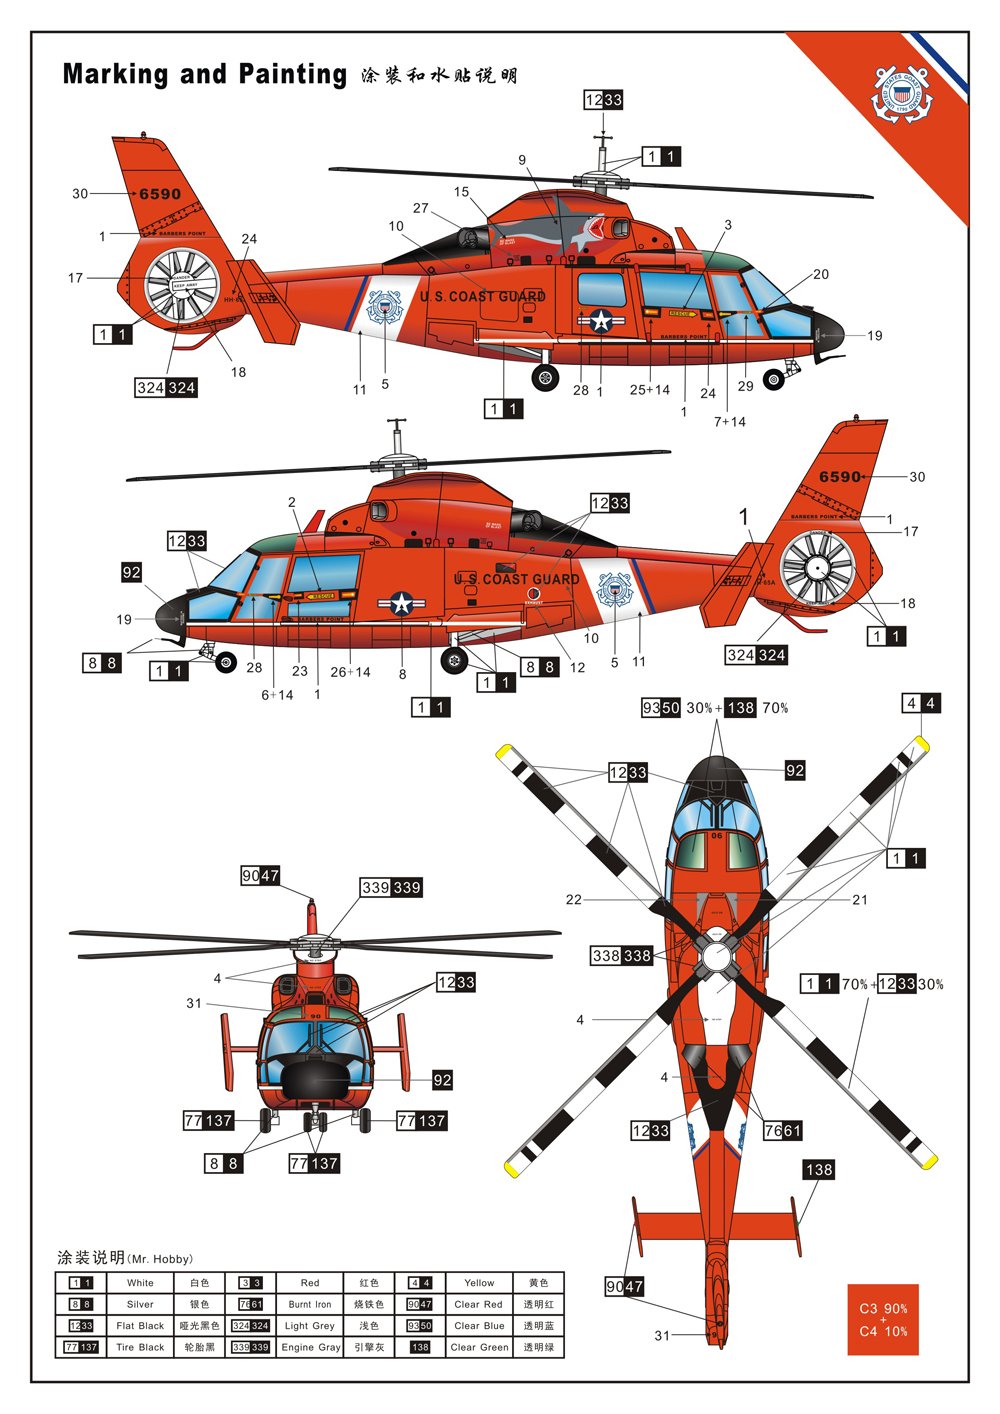 1/72 US Coast Guard HH-65A/B Dolphin Helicopter - Click Image to Close